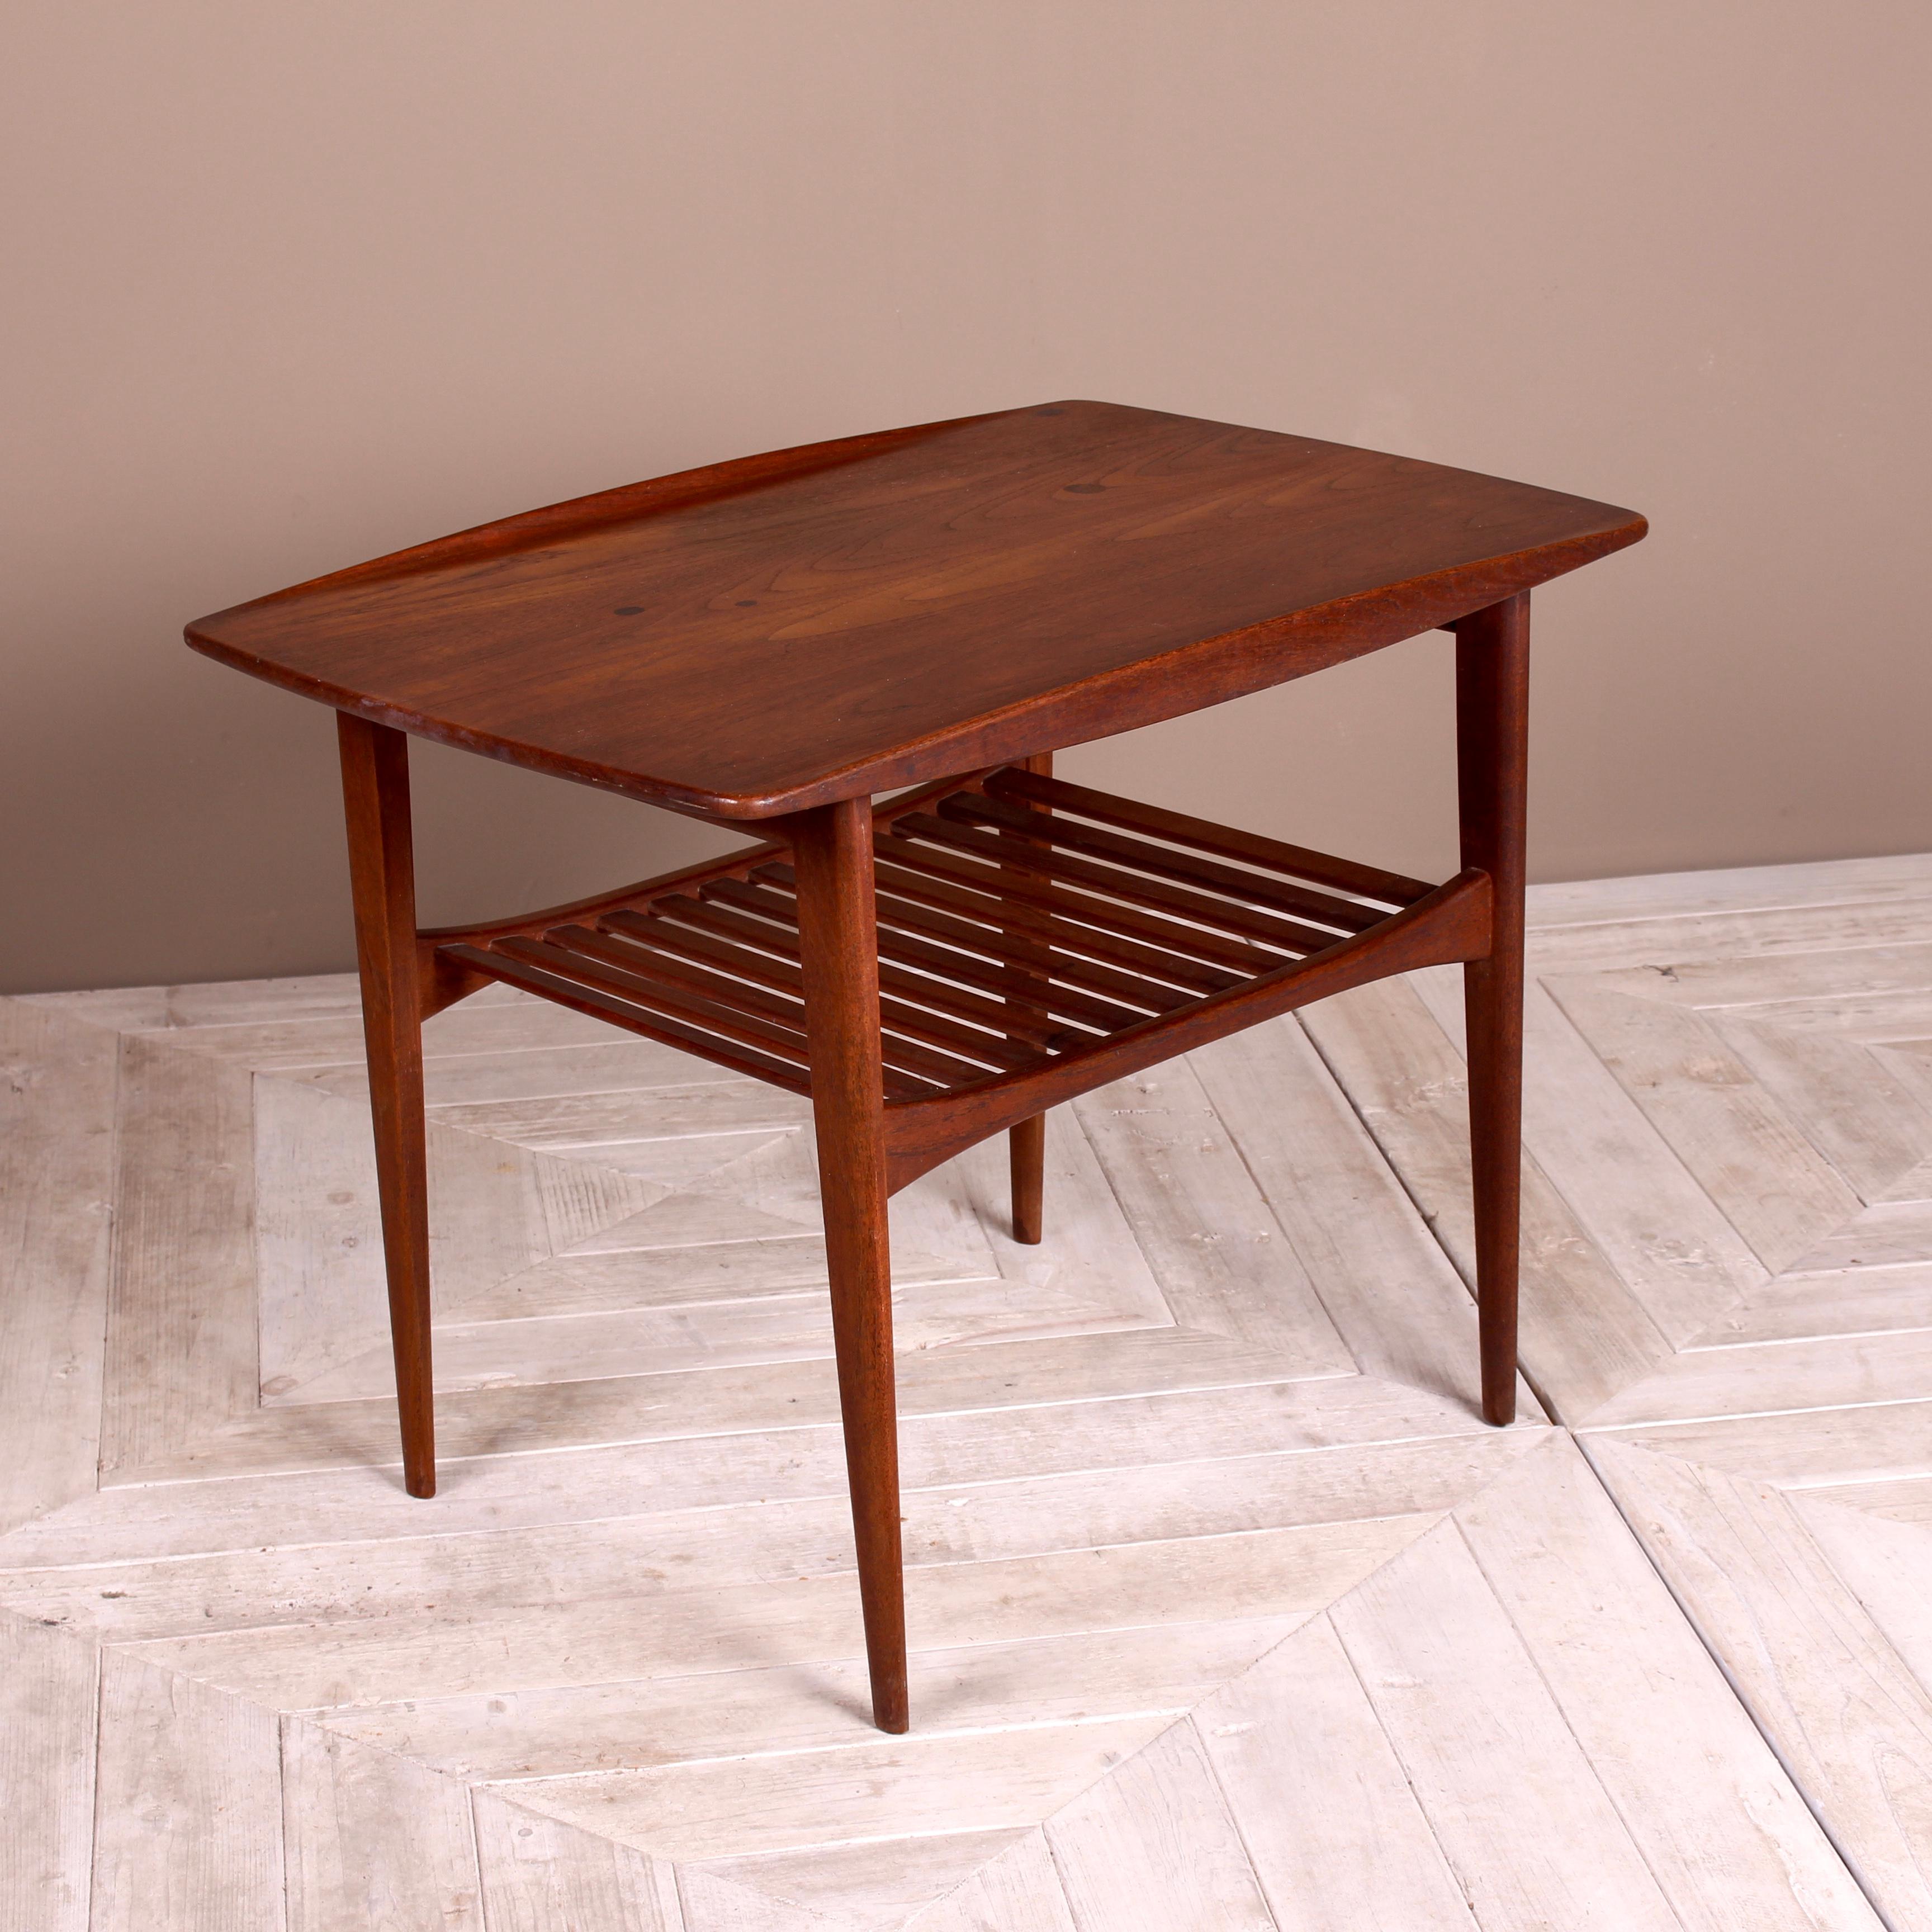 A Lovely Mid-Century Modern teak side or coffee table by Tove and Edvard Kindt-Larsen for France & sons, Denmark. Model FD 510. The badge to the underside dates the table to circa 1957 when the company changed its name from France & Daverkosen.